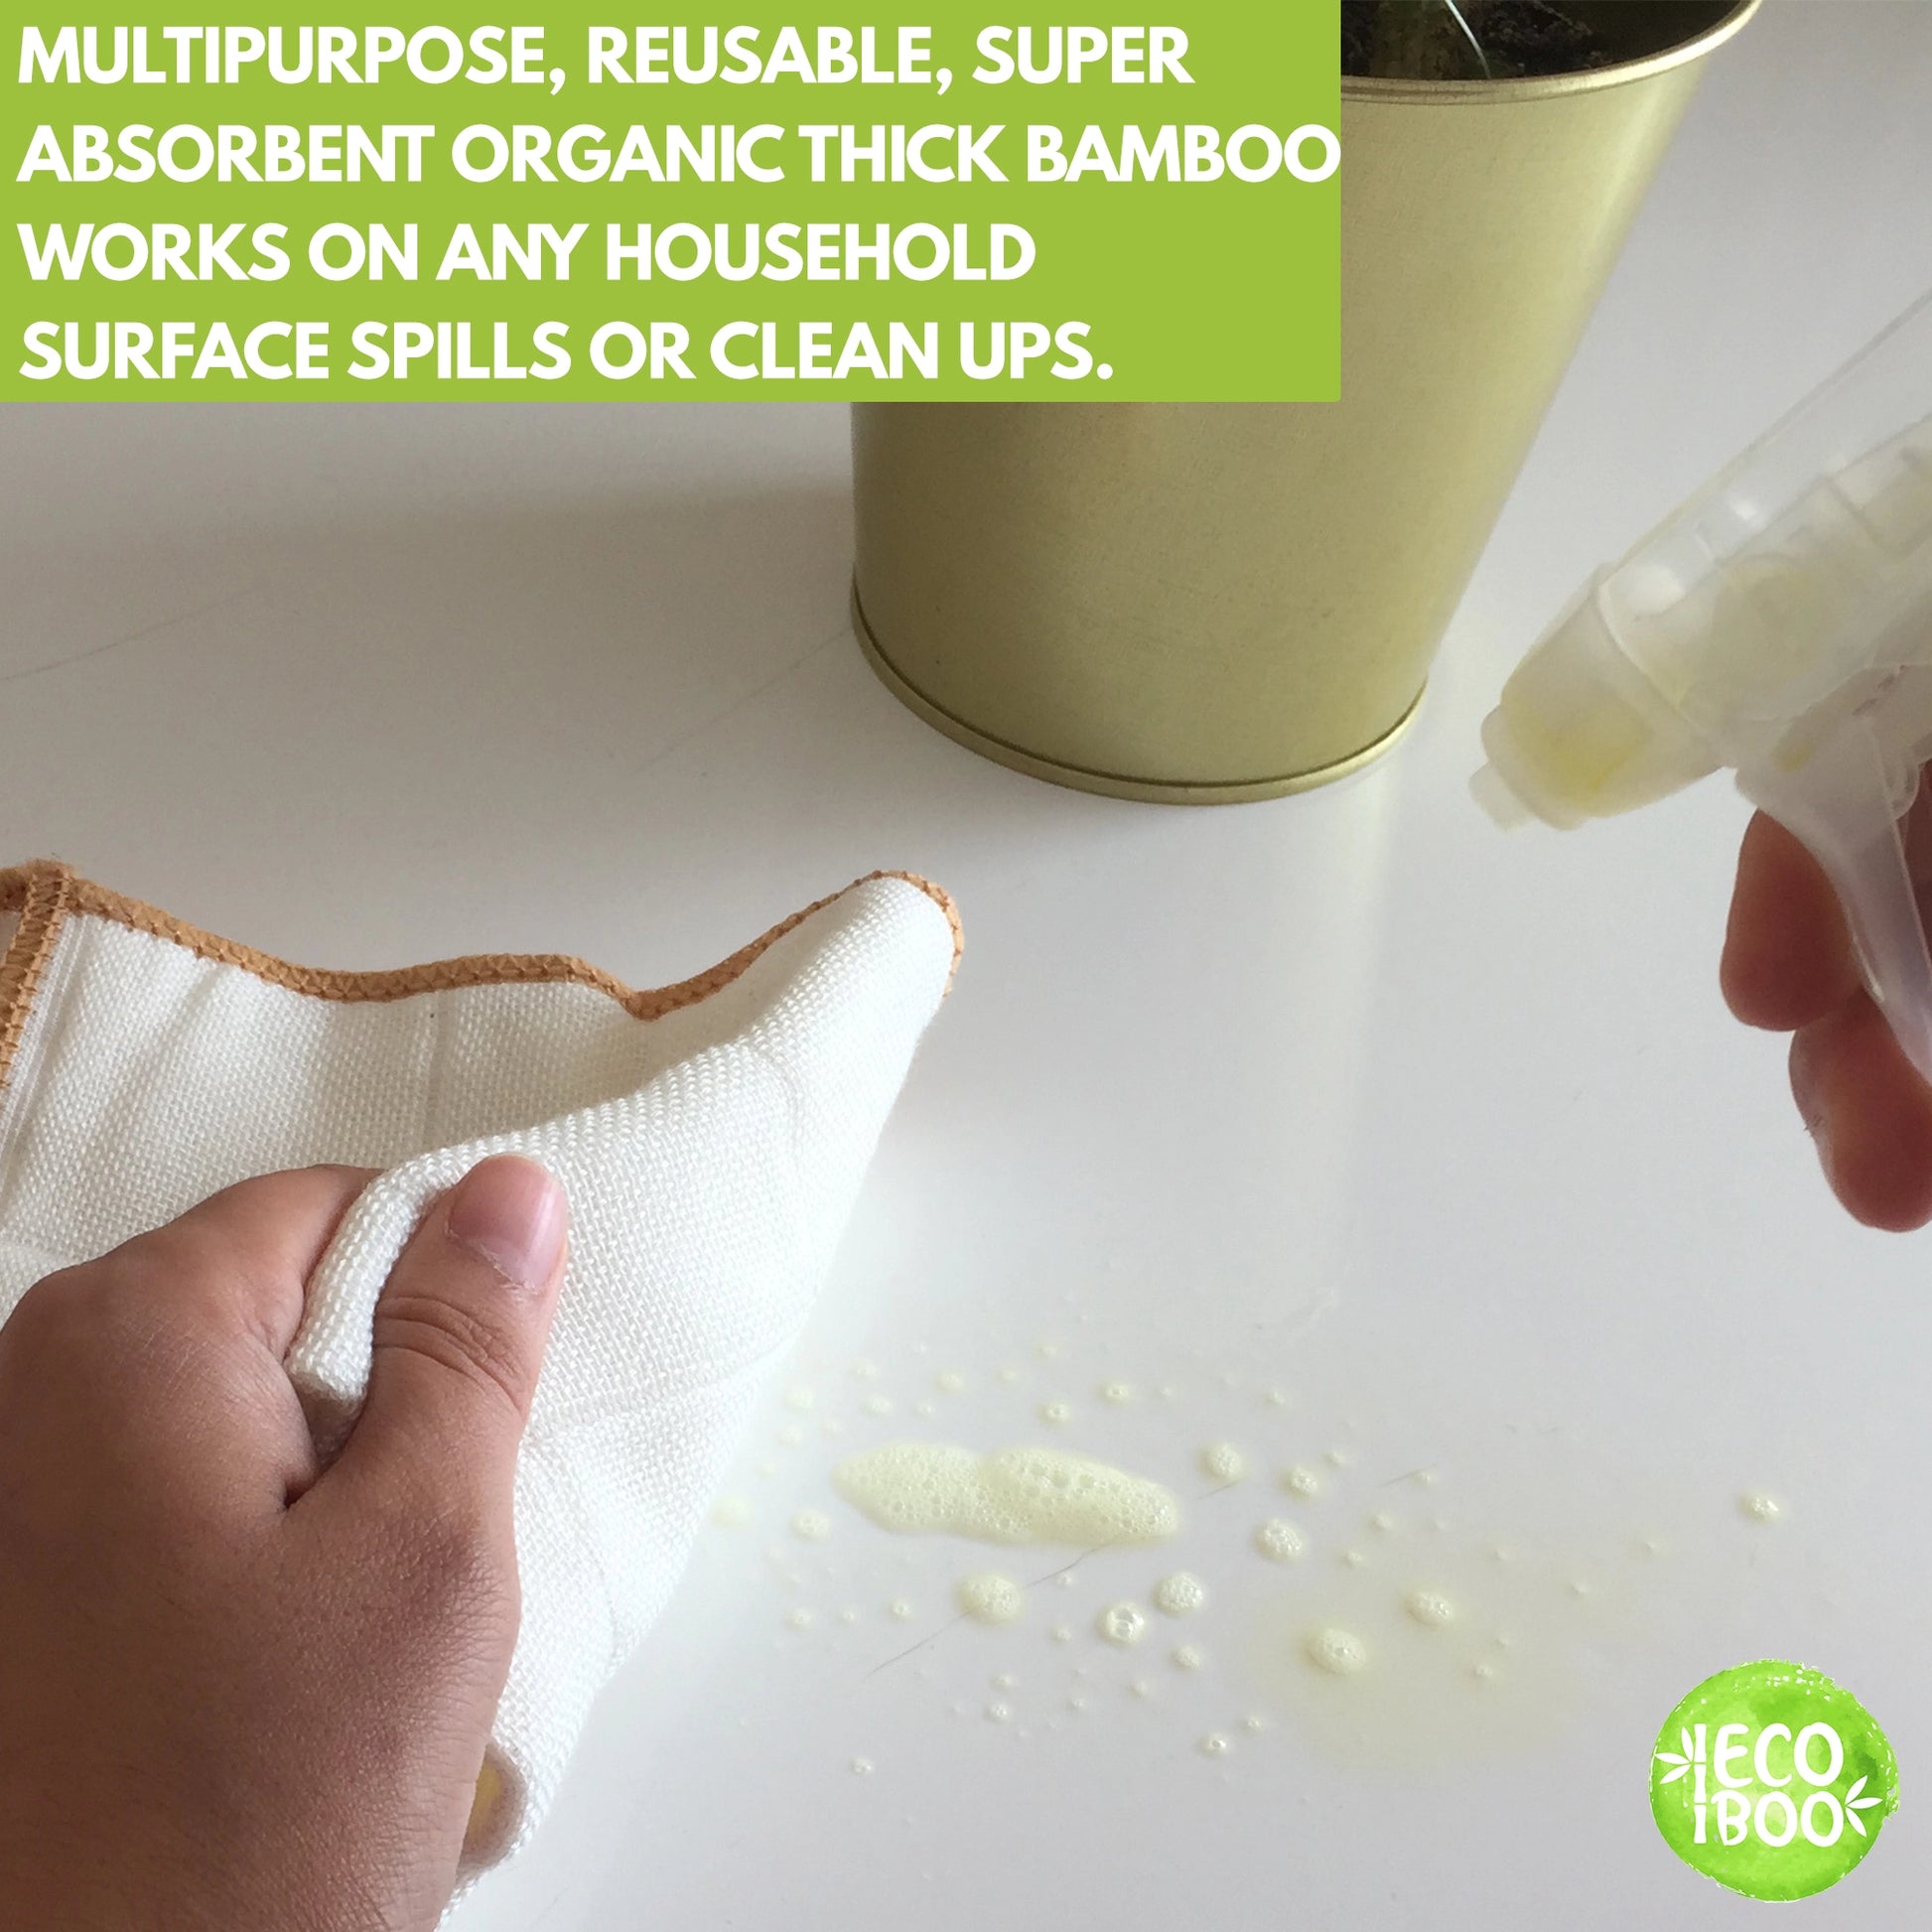 Multipurpose organic thick bamboo works on any household surface spills or clean ups